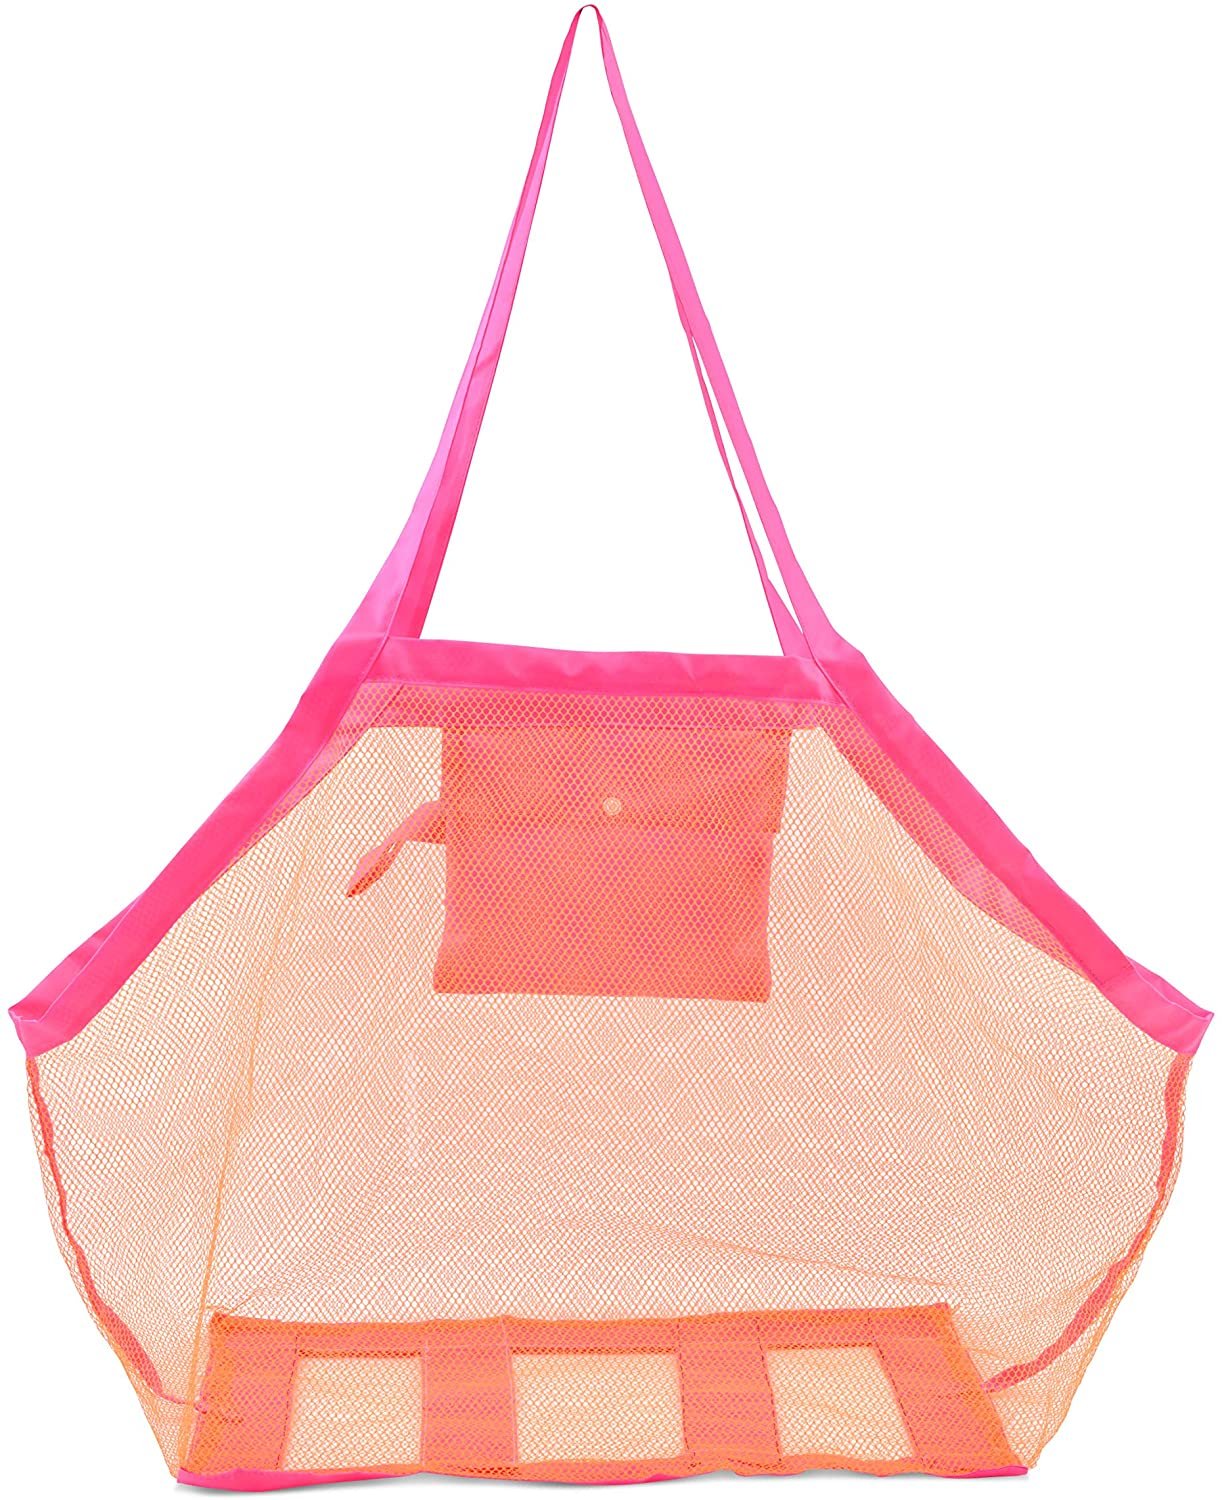 Large Orange Mesh Beach Tote Bag | Durable, Reusable, Foldable w/Pouch | Perfect for Sand Toys, Towels, Picnic | 17.5x17.5x10